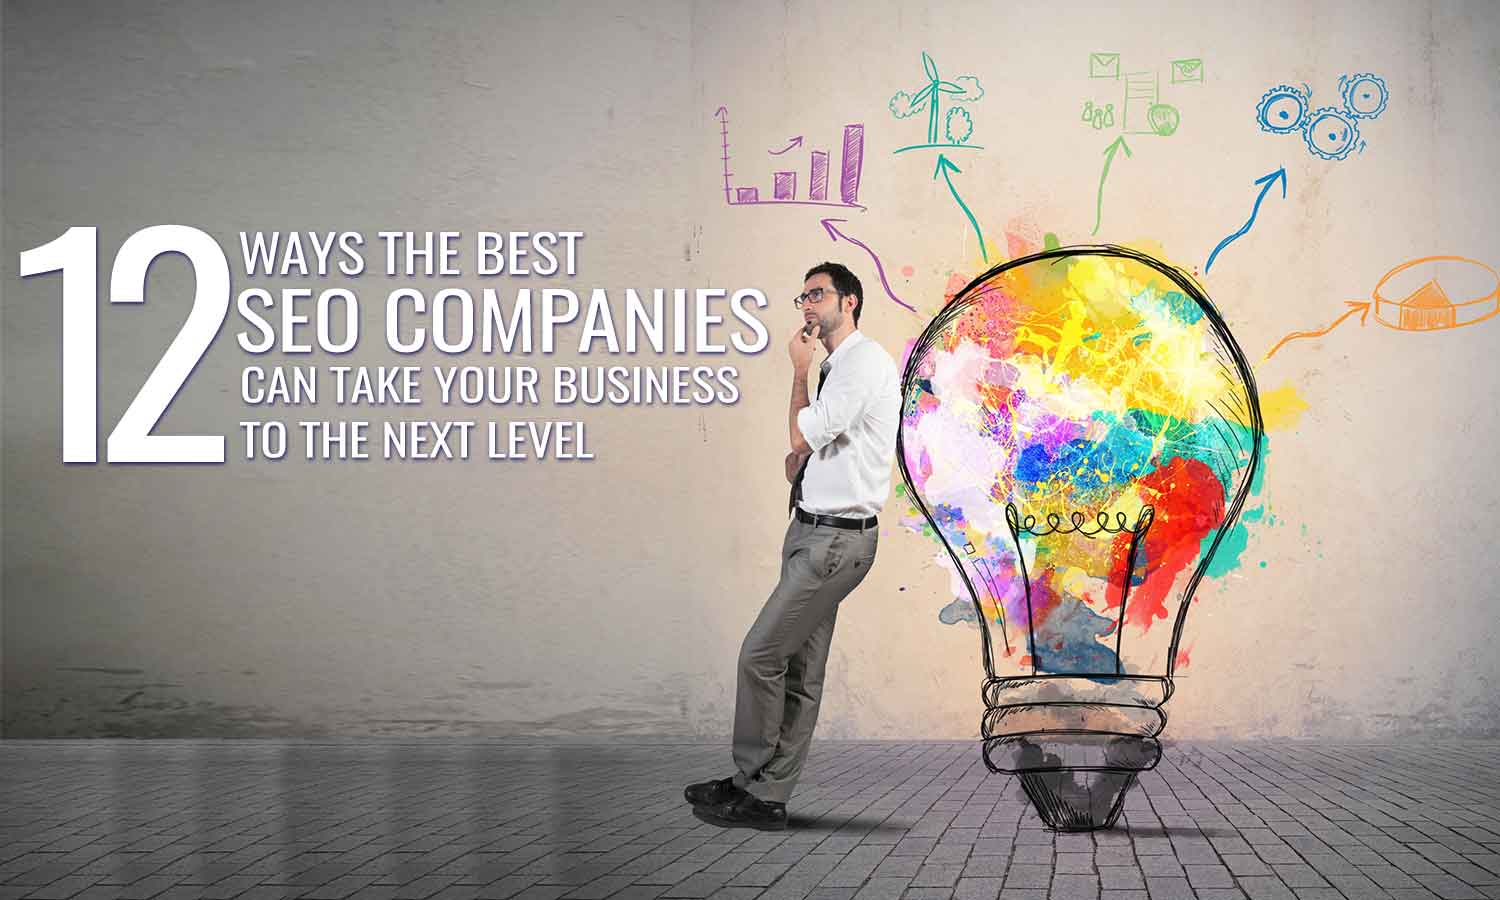 12-Ways-the-Best-SEO-Companies-Can-Take-Your-Business-to-Next-Level